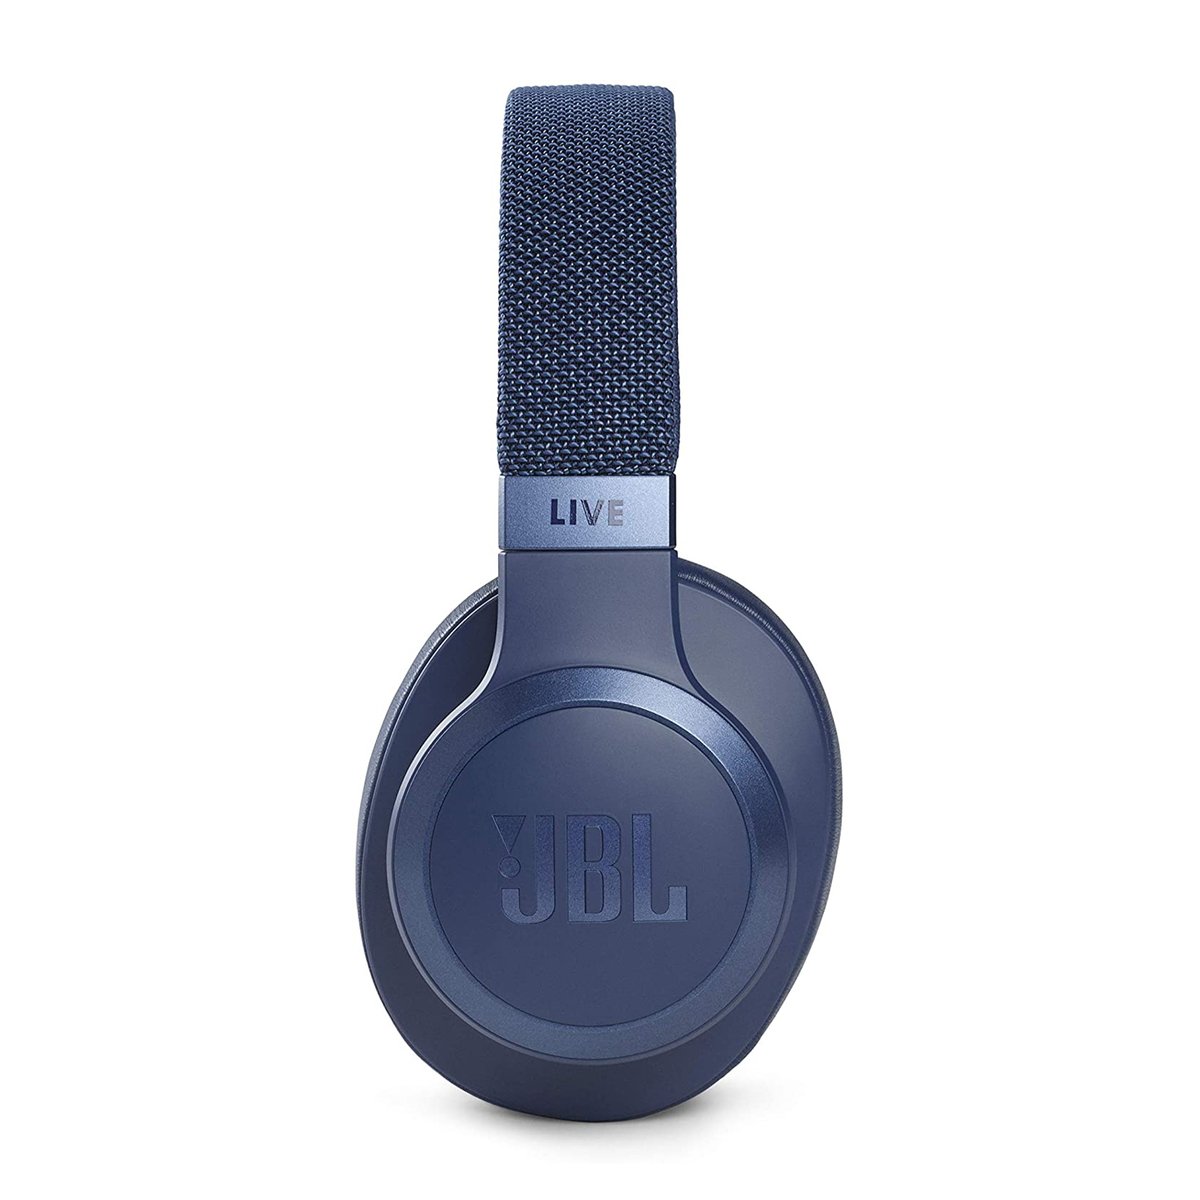 JBL Live 660NC Wireless Over-Ear Noise Cancelling Headphones Blue